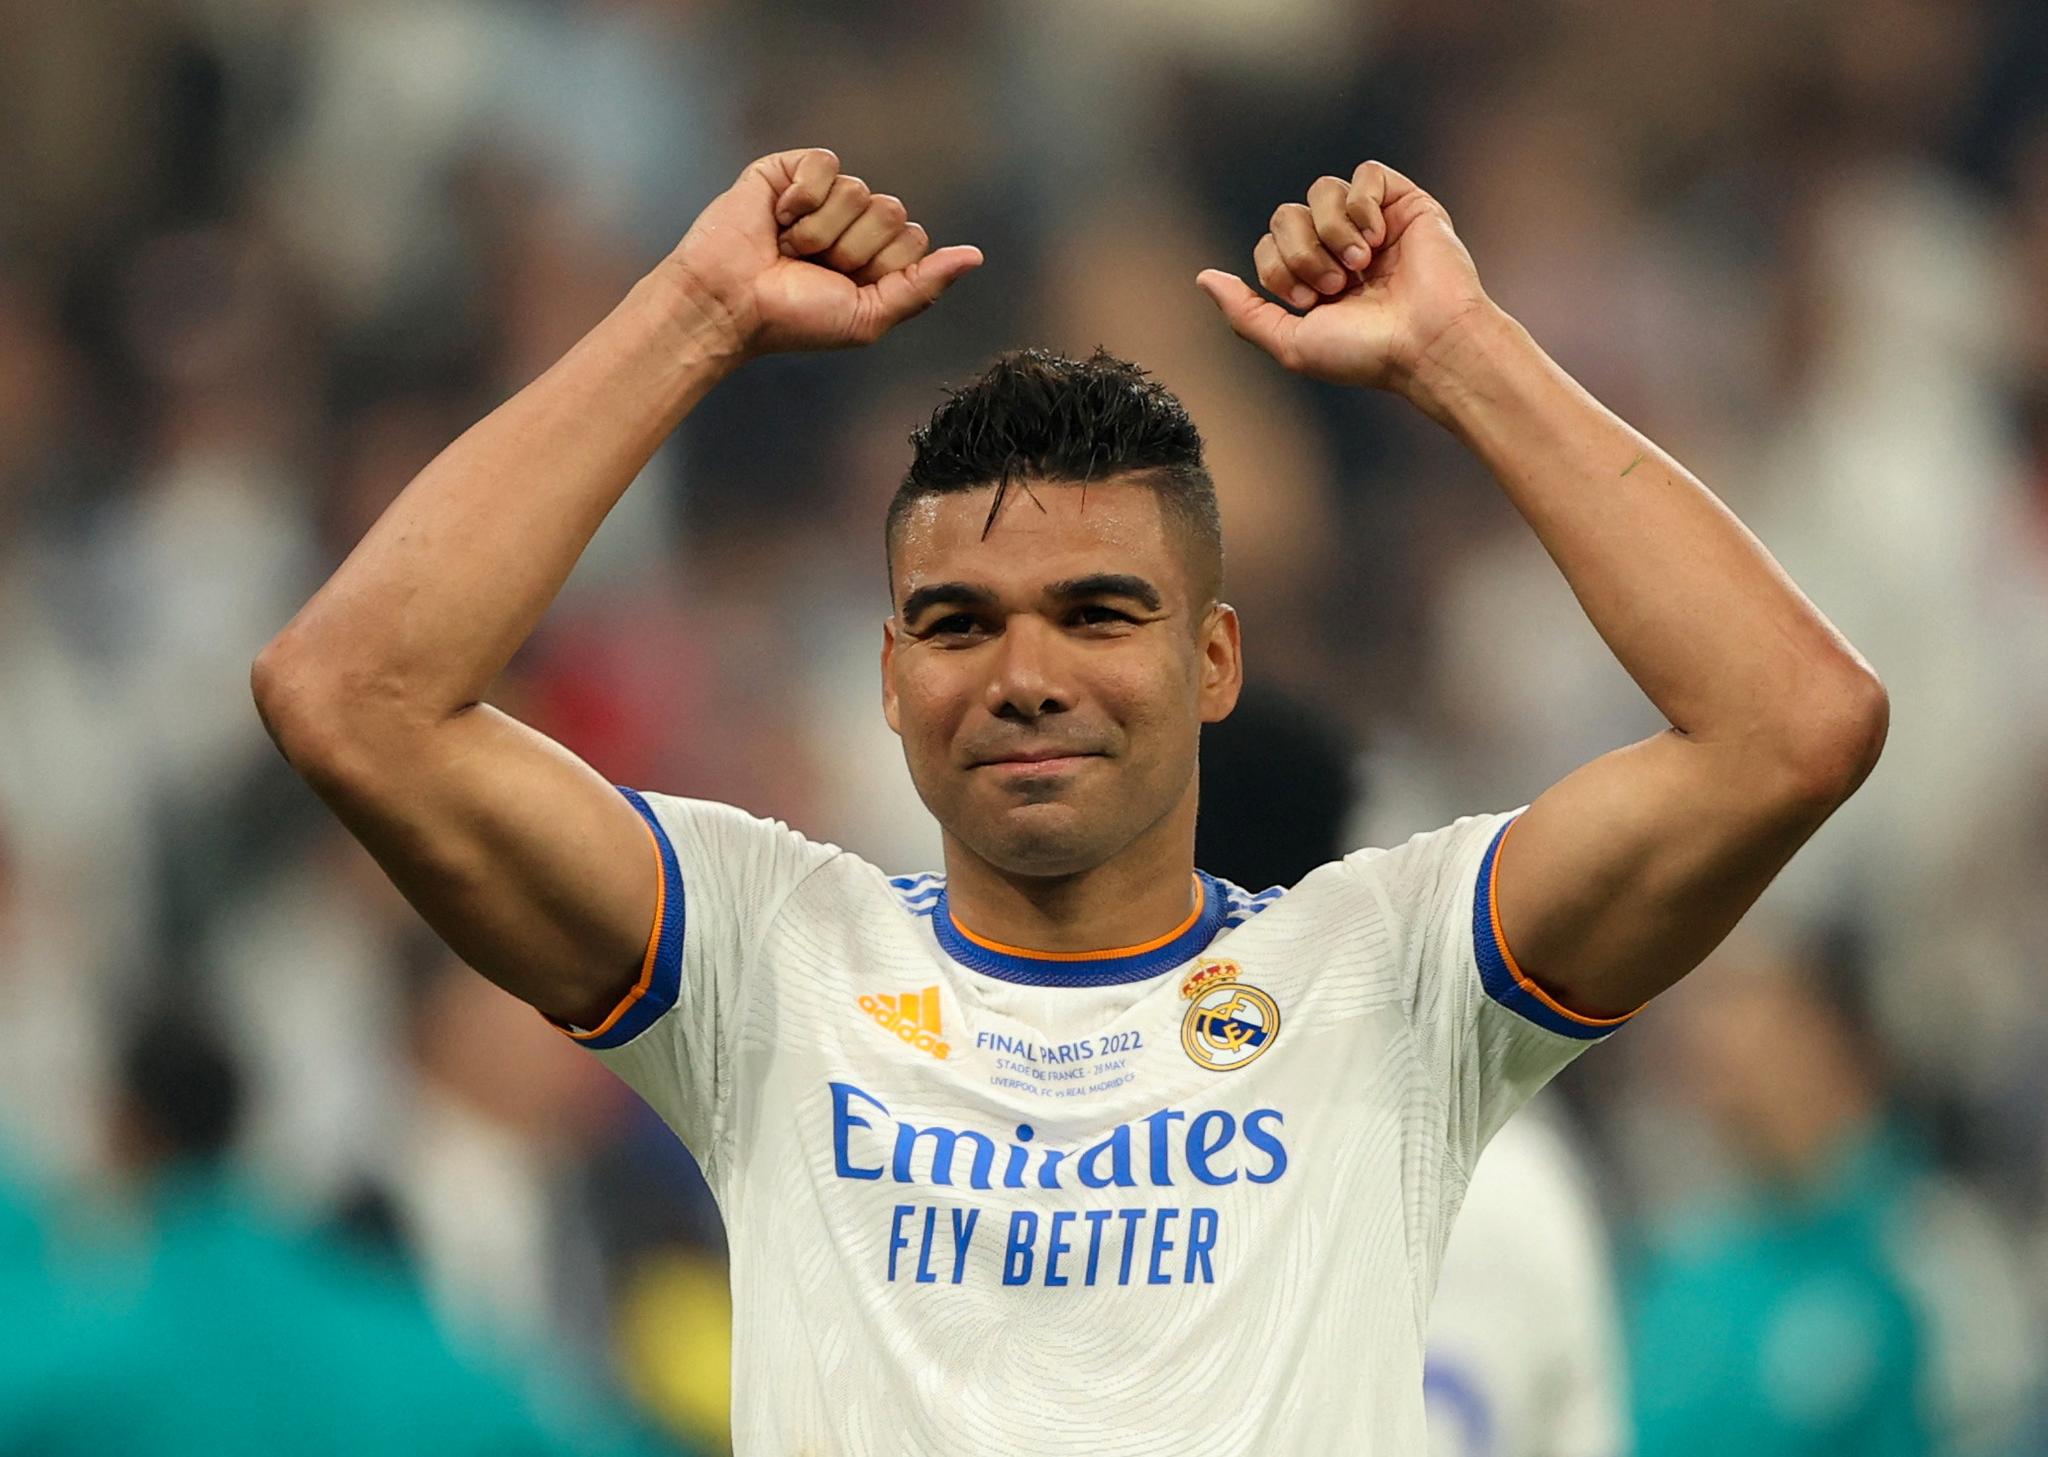 Manchester United confirms deal with Real Madrid for Casemiro